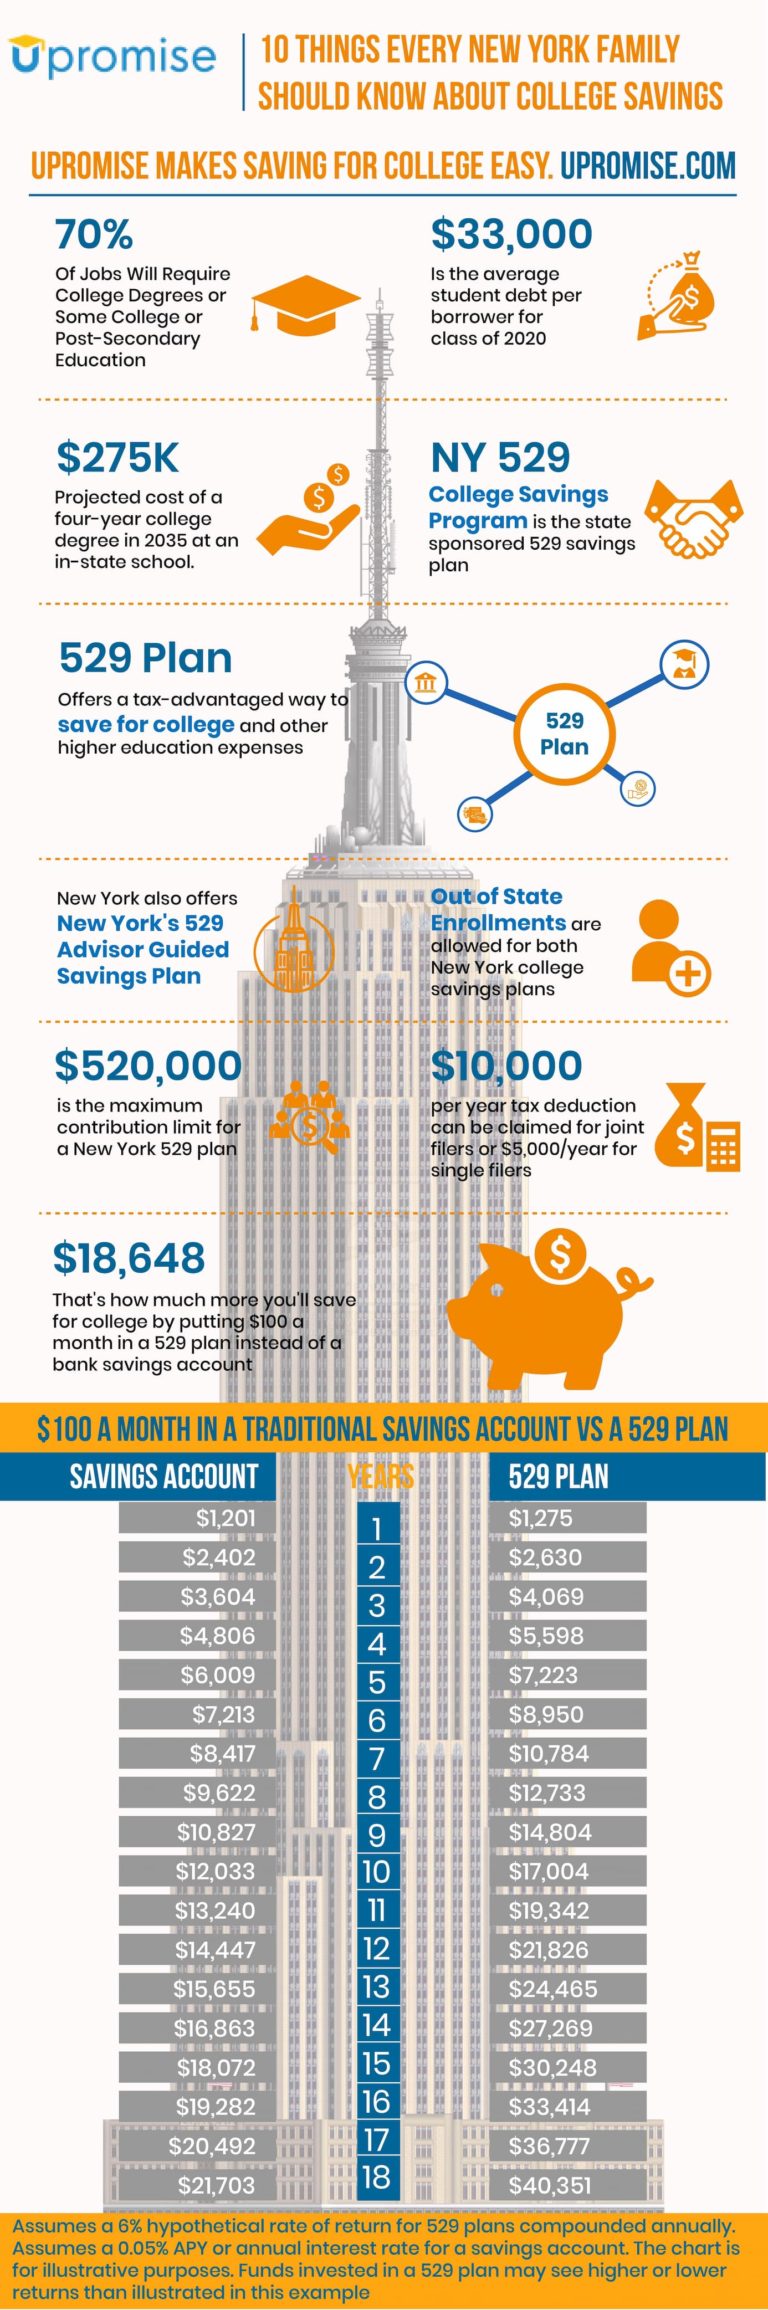 529-plan-new-york-infographic-10-facts-about-ny-s-529-to-know